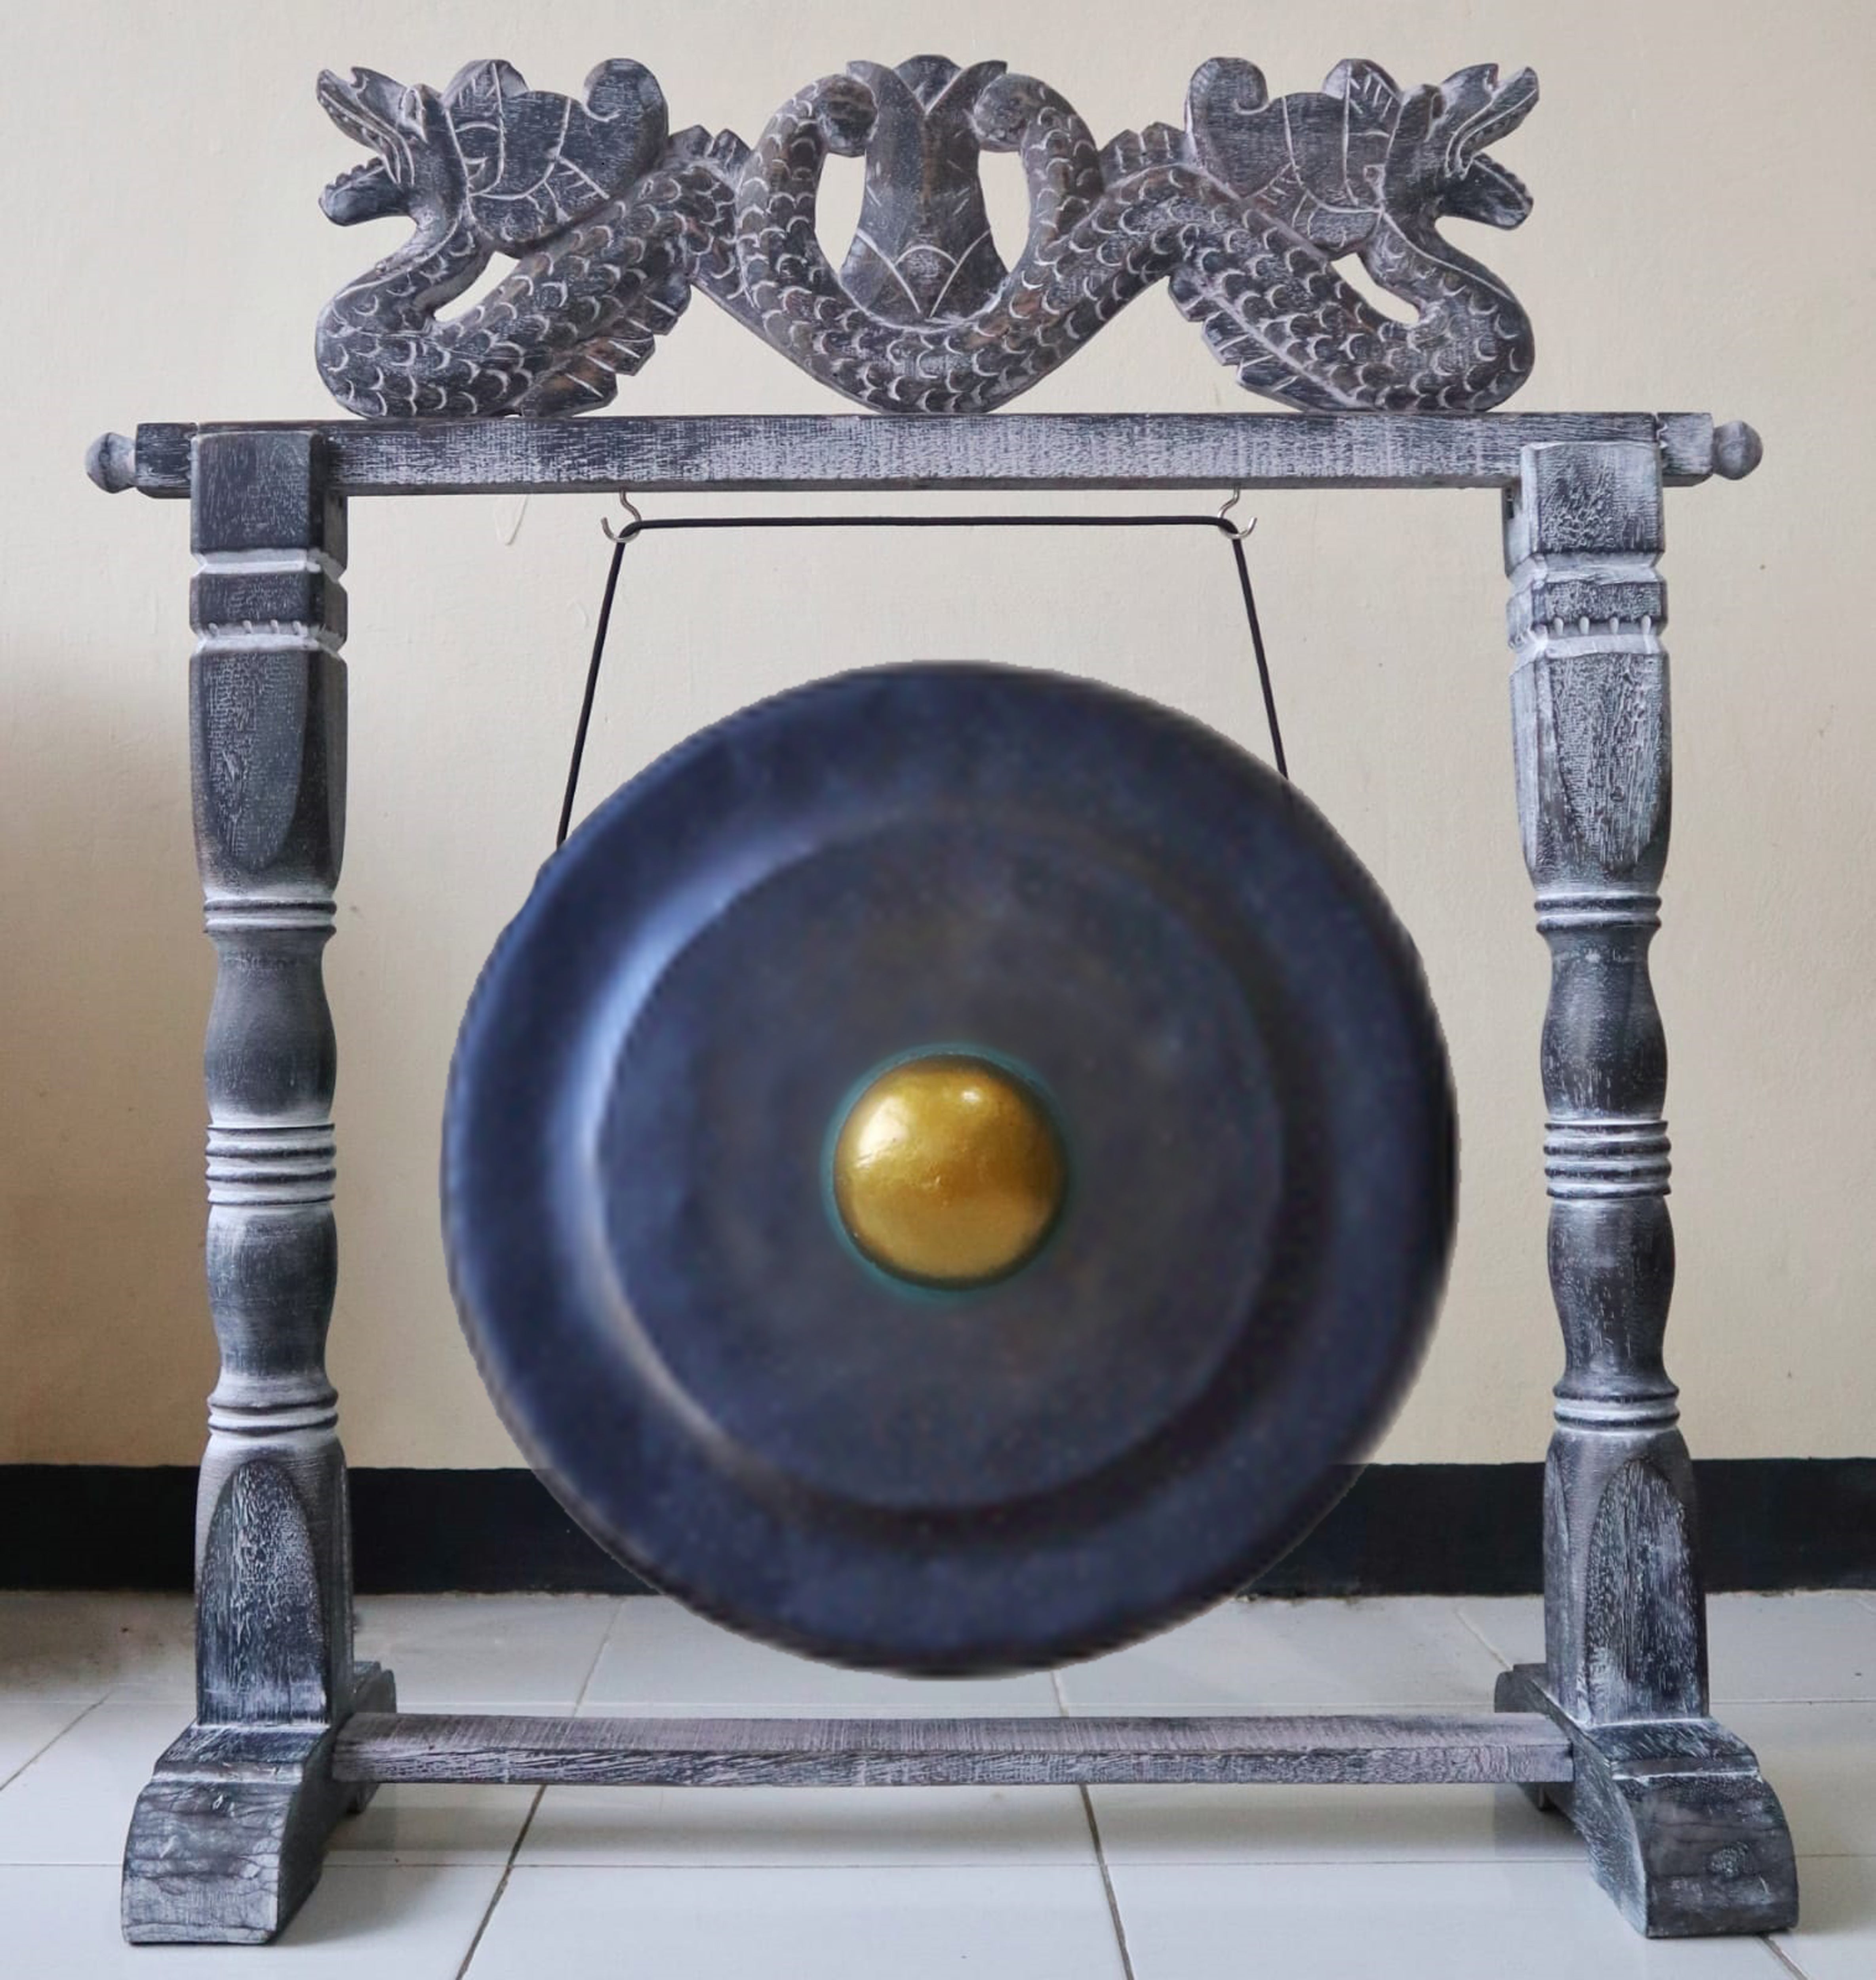 Medium Healing Gong in Stand - 20 inches - Black